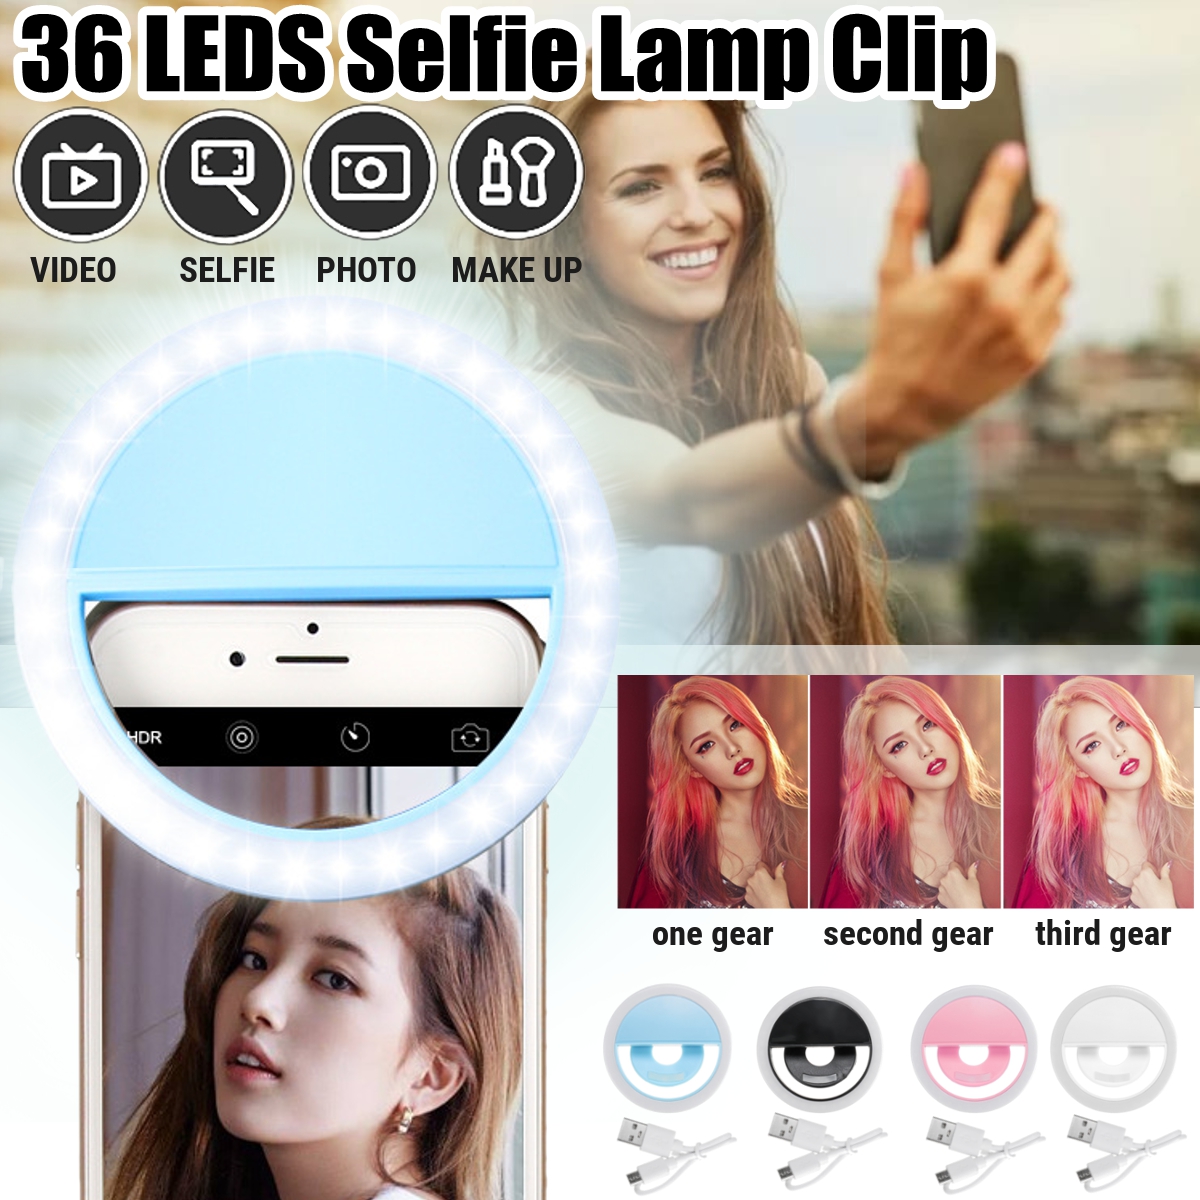 Bakeey-Selfie-36-LEDS-Fill-Lamp-Ring-Light-Universal-Clip-3-levels-Brightness-For-Cell-Phone-1715111-1